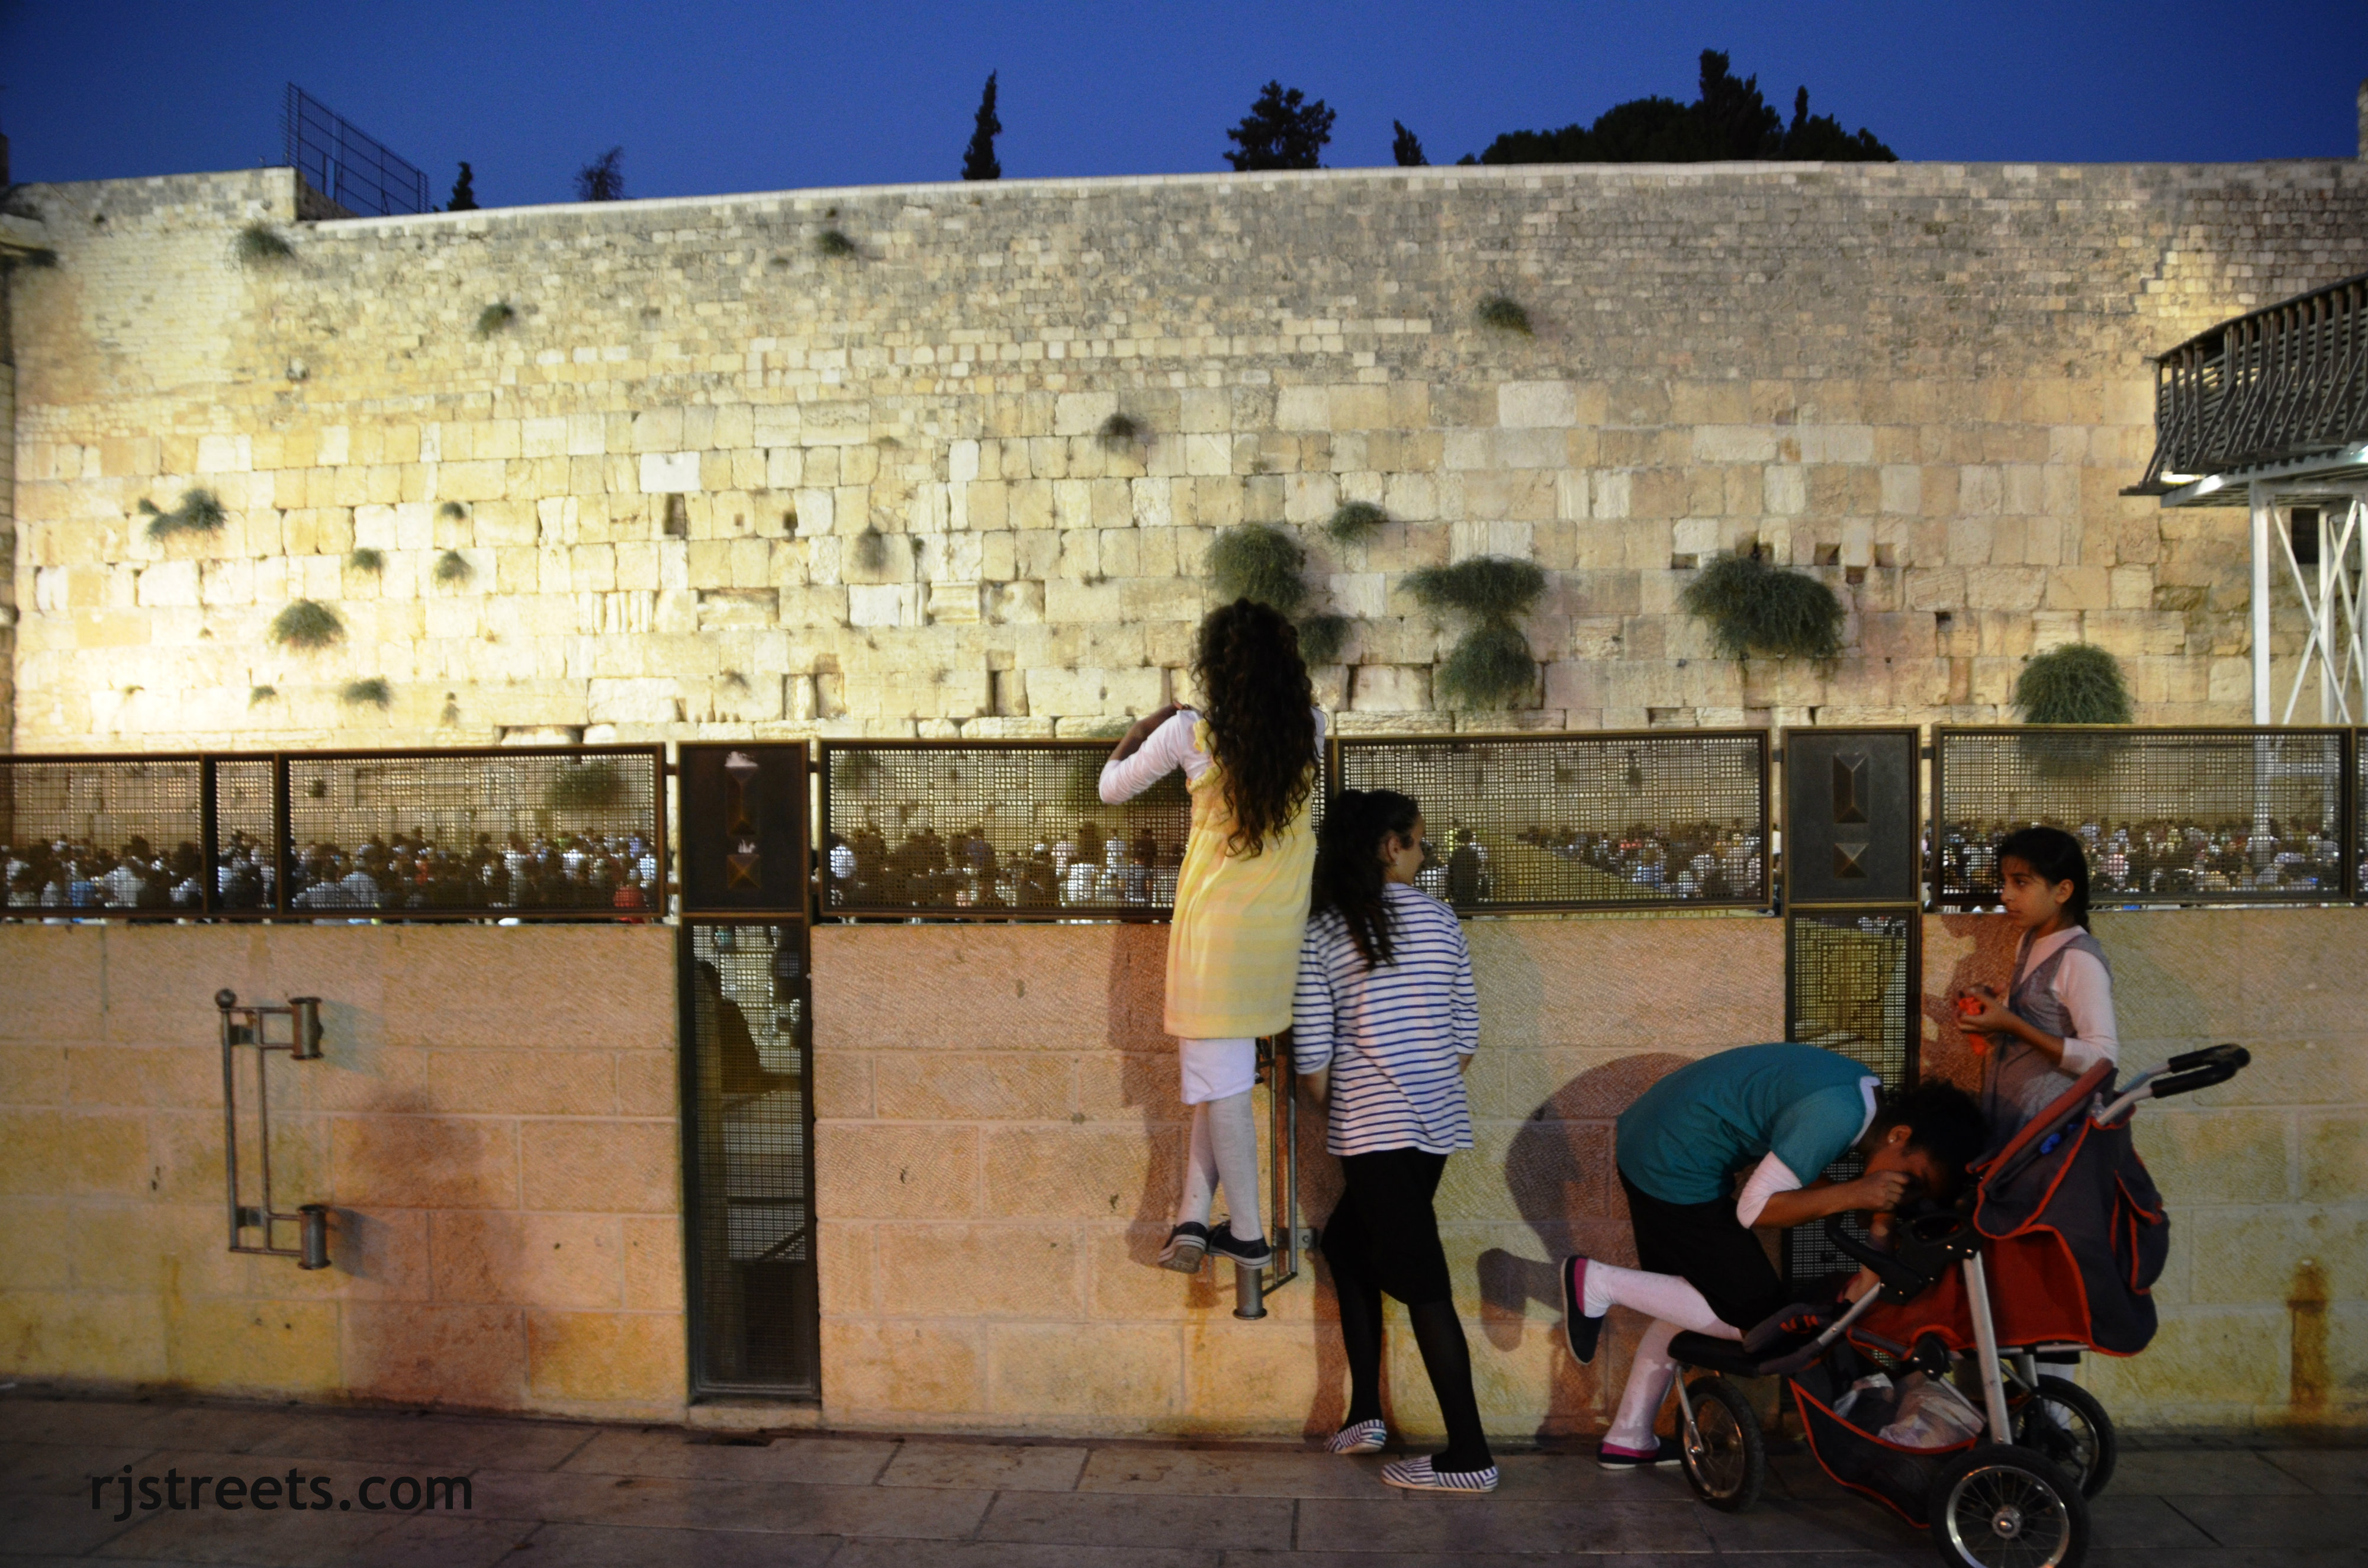 image Kosel, photo Western WAll, picture Kossel